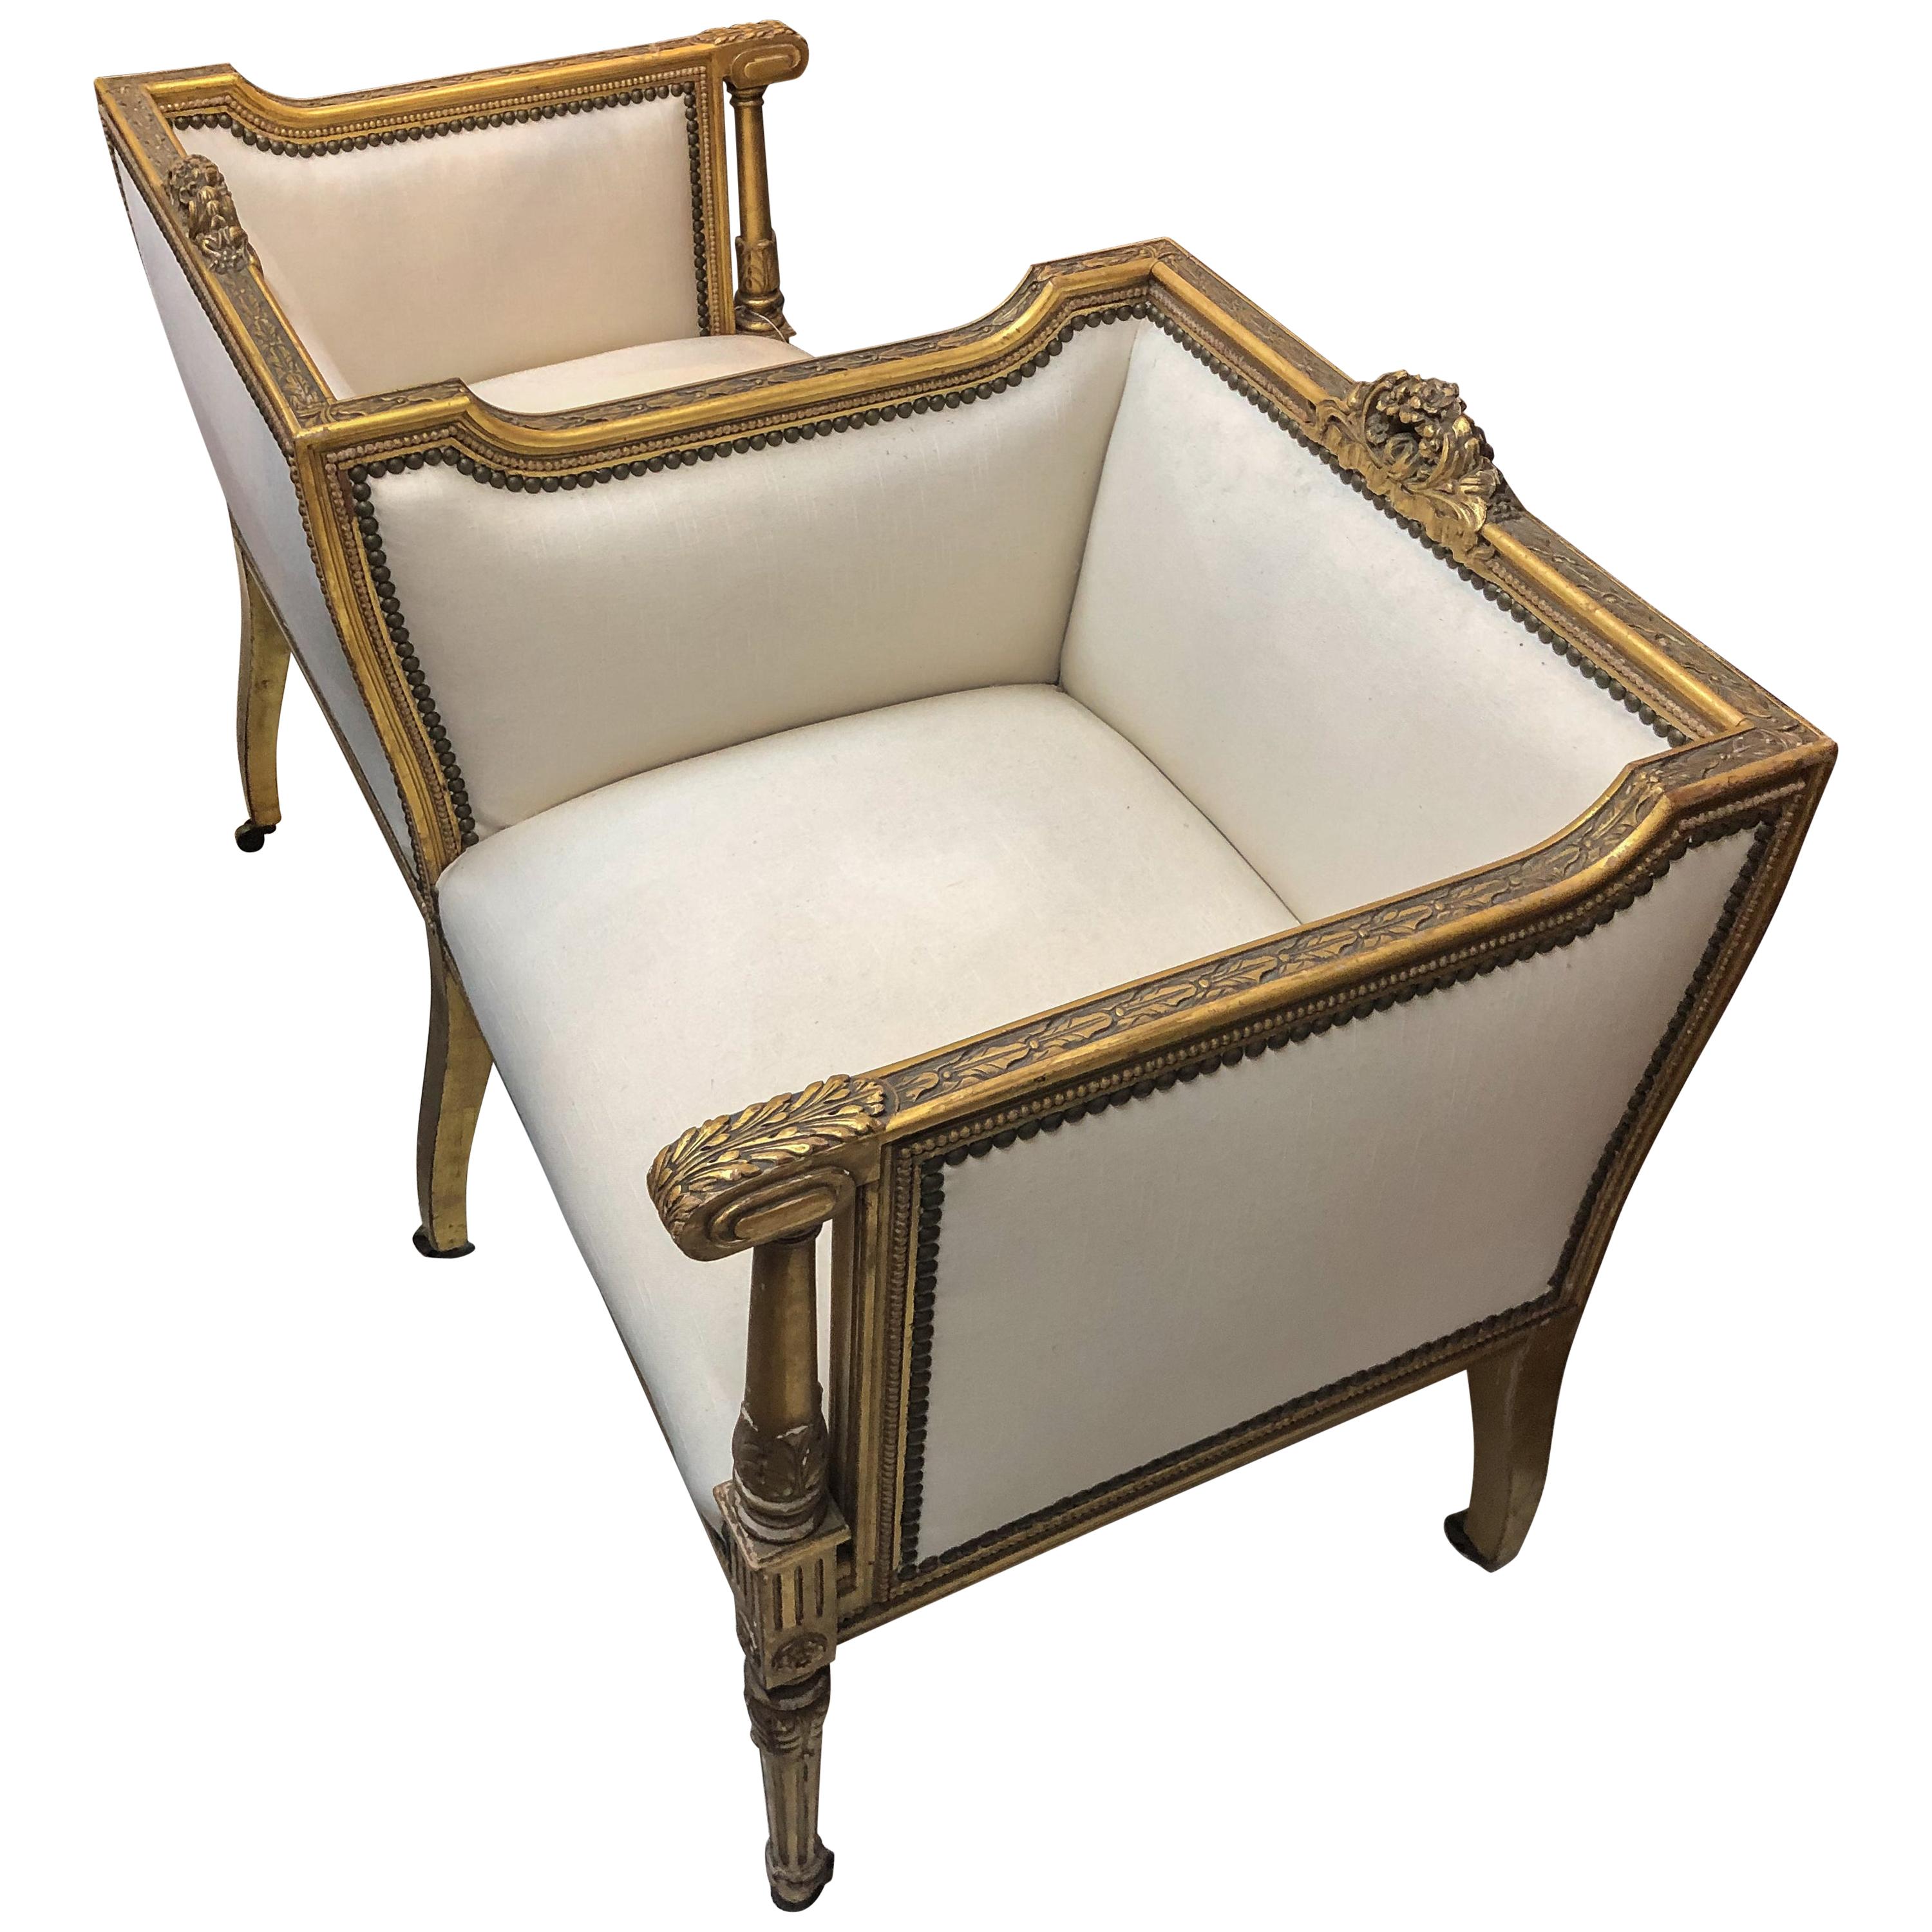 19th Century French Vis-a-vis Giltwood Chair in Ivory Linen